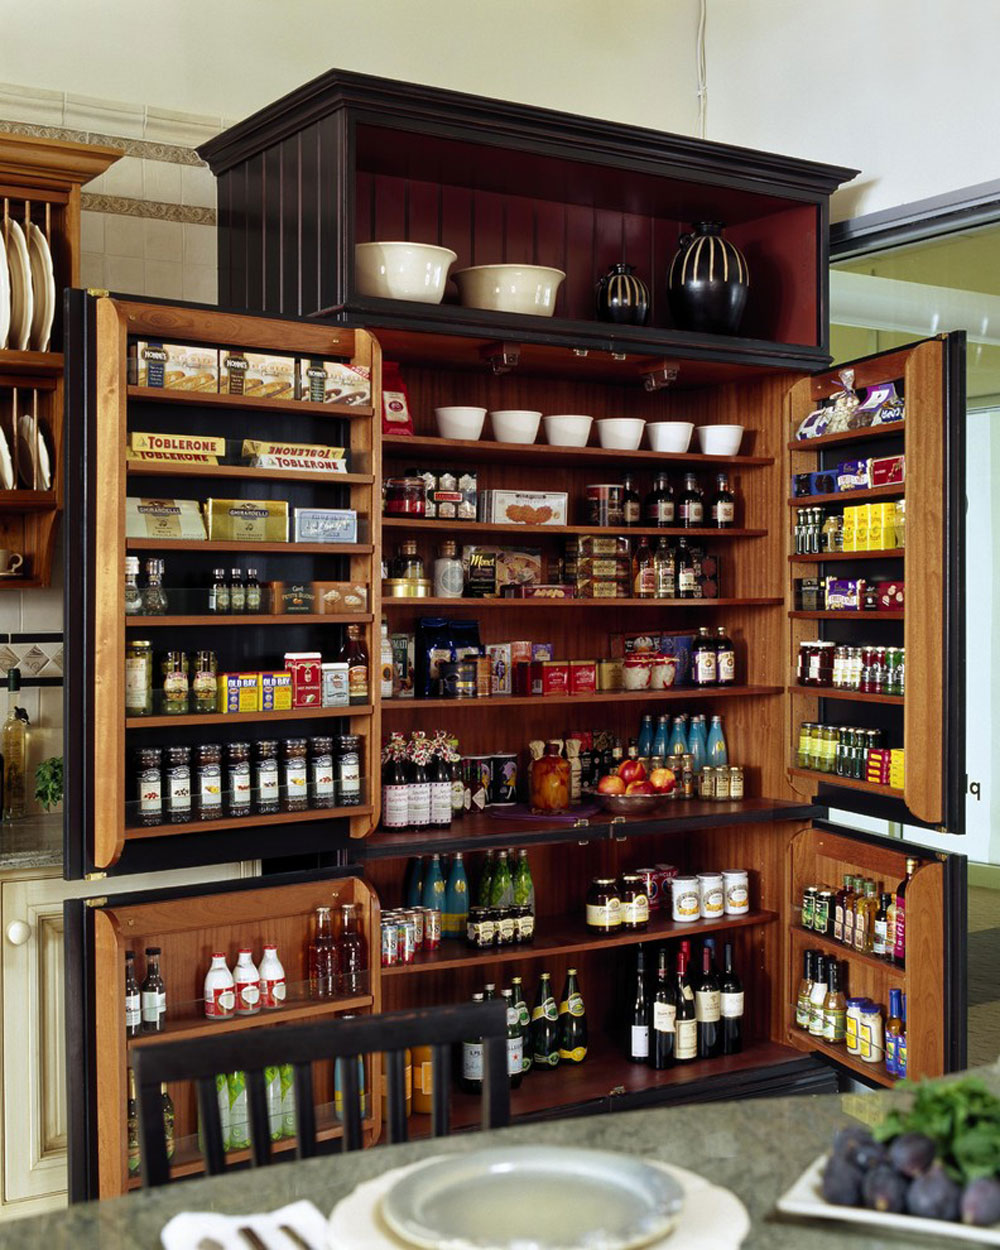 Showroom-Display-by-Venegas-and-Company Pantry cabinet ideas: Shelving and storage ideas for your kitchen